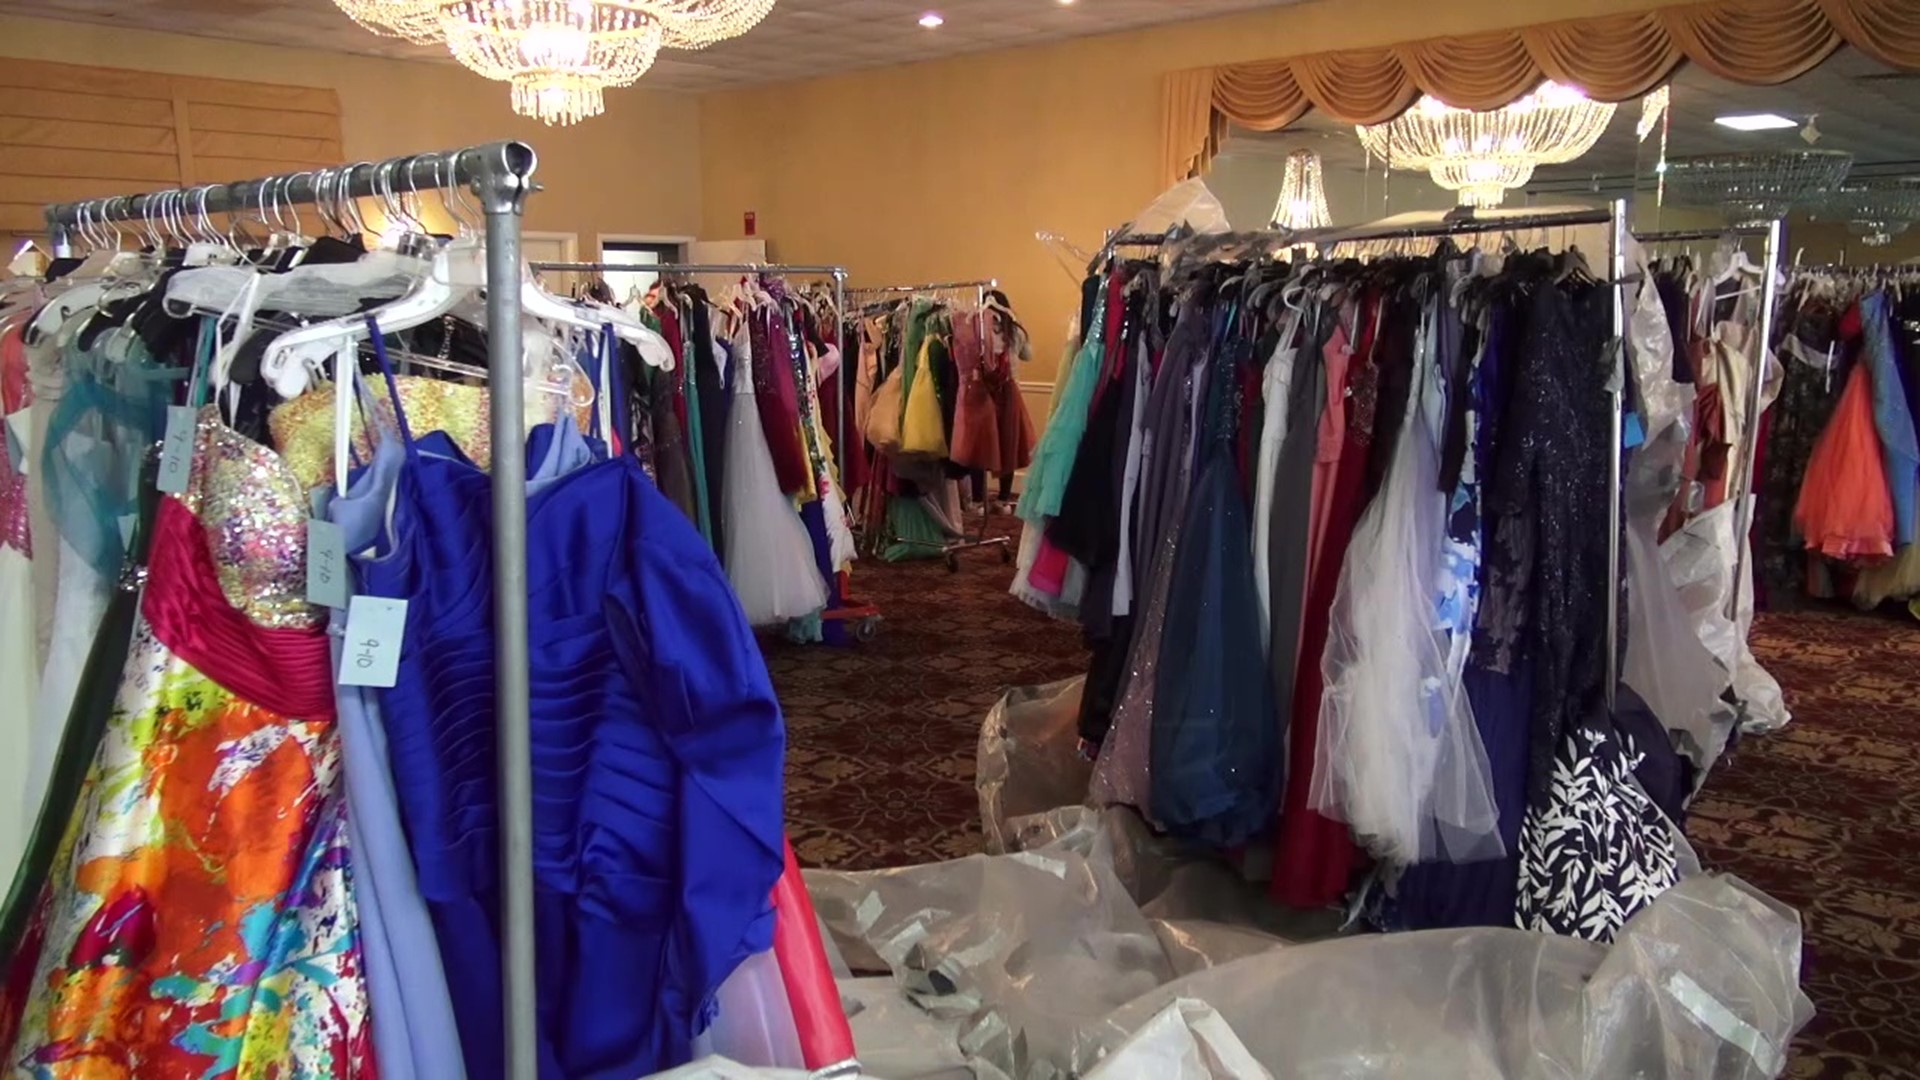 The group, which provides low-cost dresses and gowns for students, announced the closure on Thursday.